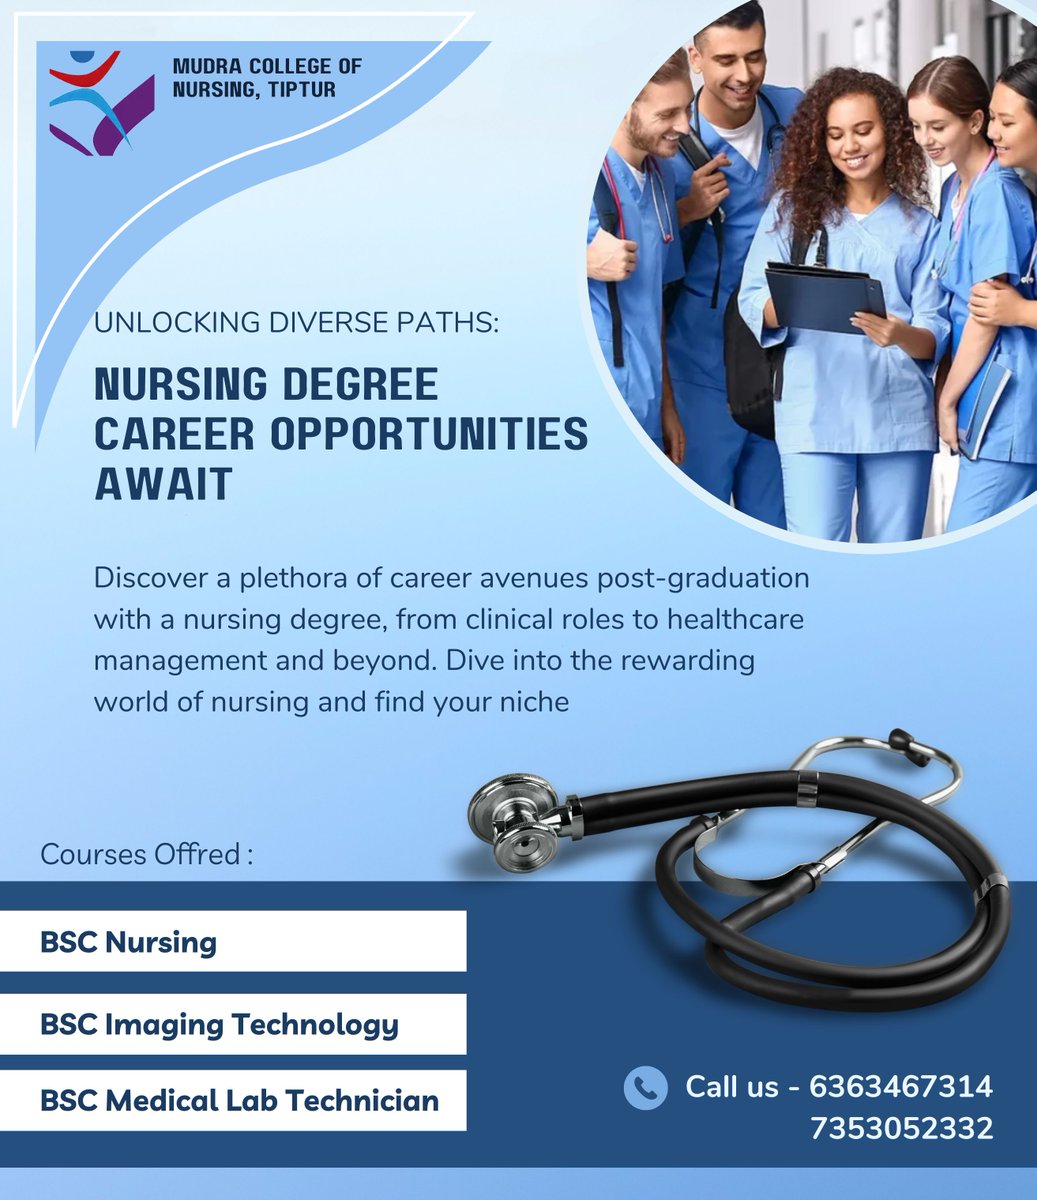 Discover a plethora of career avenues post-graduation with a nursing degree, from clinical roles to healthcare management and beyond. Dive into the rewarding world of nursing and find your niche.

#MundraNursingCollege #NursingCareers